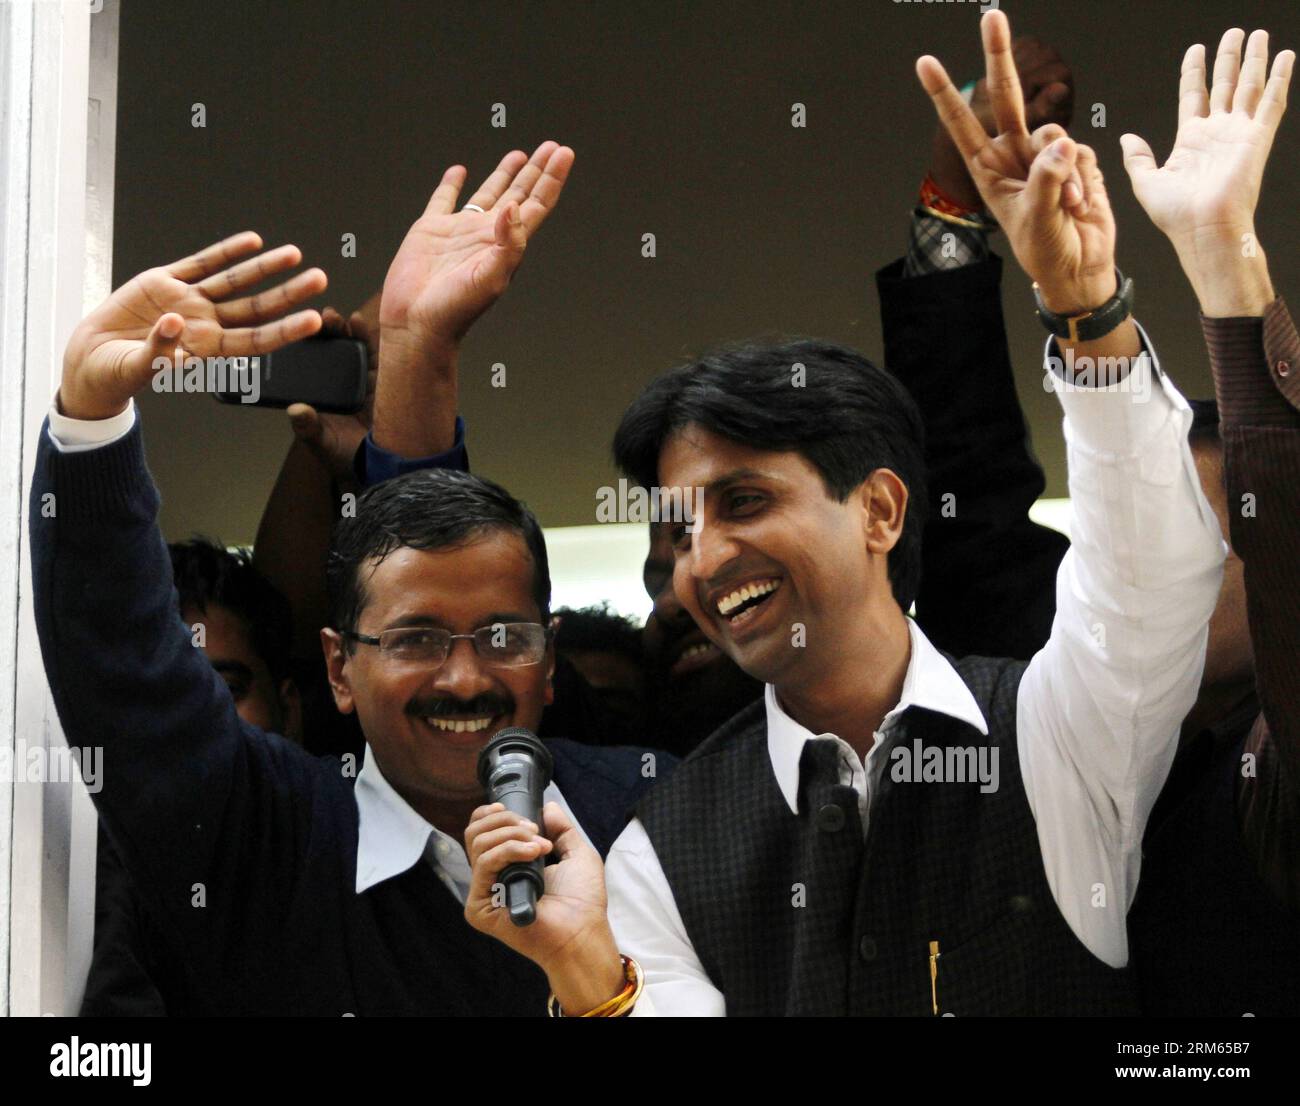 Bildnummer: 60808393  Datum: 08.12.2013  Copyright: imago/Xinhua     Aam Aadmi Party leader Arvind Kejriwal (L, Front) and his party colleagues wave to the crowd as they celebrate the party s performance in Delhi state Assembly elections in New Delhi, India, Dec. 8, 2013. The Bharatiya Janata Party (BJP) came close to getting a majority, winning 32 seats in the Indian capital where the Congress was in power for the last 15 years, while the Congress was reduced to eight, and the recently formed anti-corruption Aam Aadmi Party (Common Man s Party) bagged 28 seats in the 70-member assembly. (Xinh Stock Photo